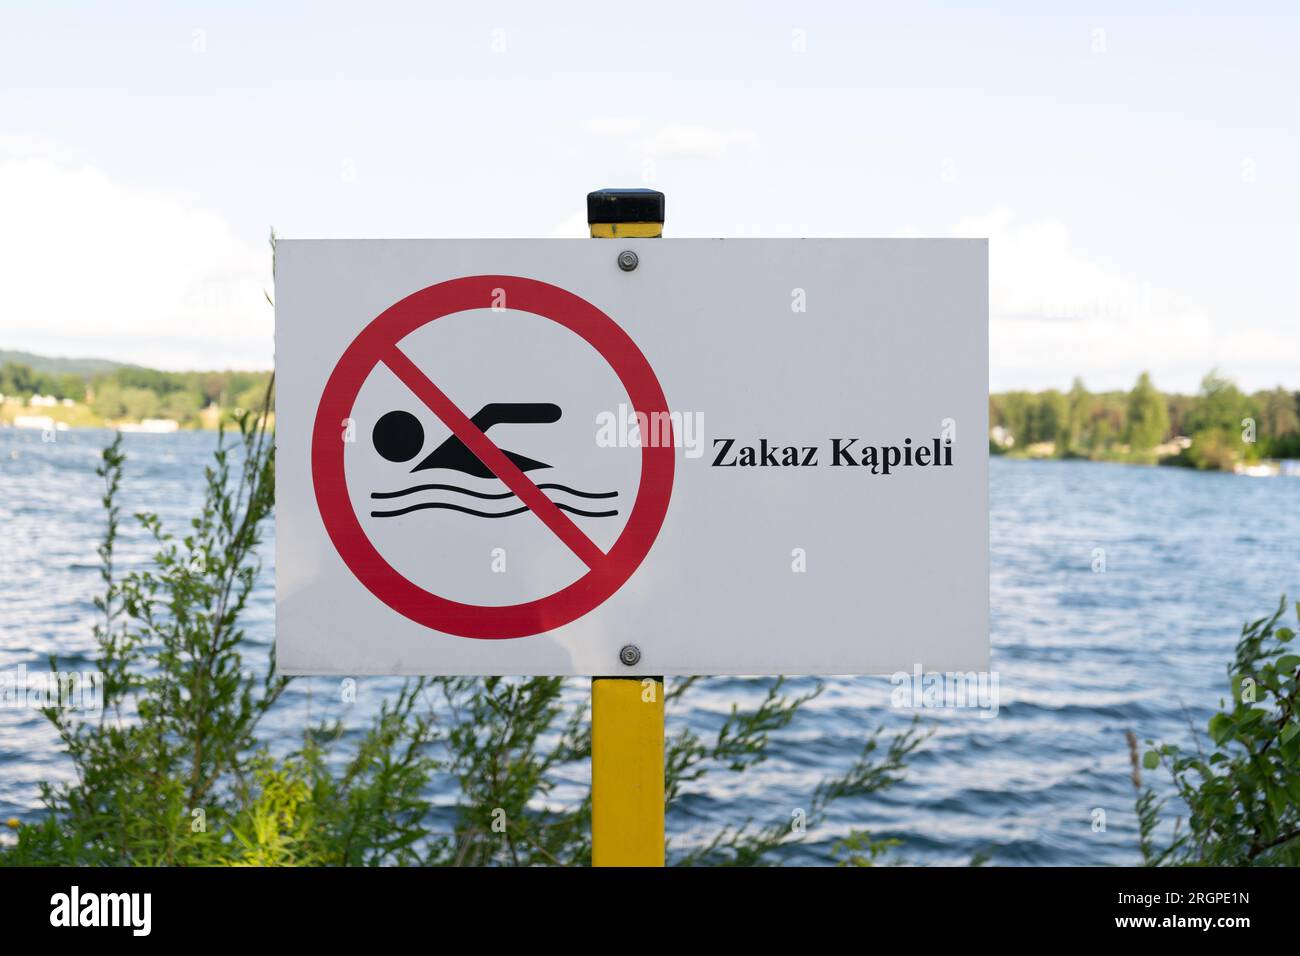 No Swimming sign post plaque. No swim area signage, mounted on water shore of lake in Poland. Text in Polish Zakaz kąpieli means Swimming prohibited. Stock Photo